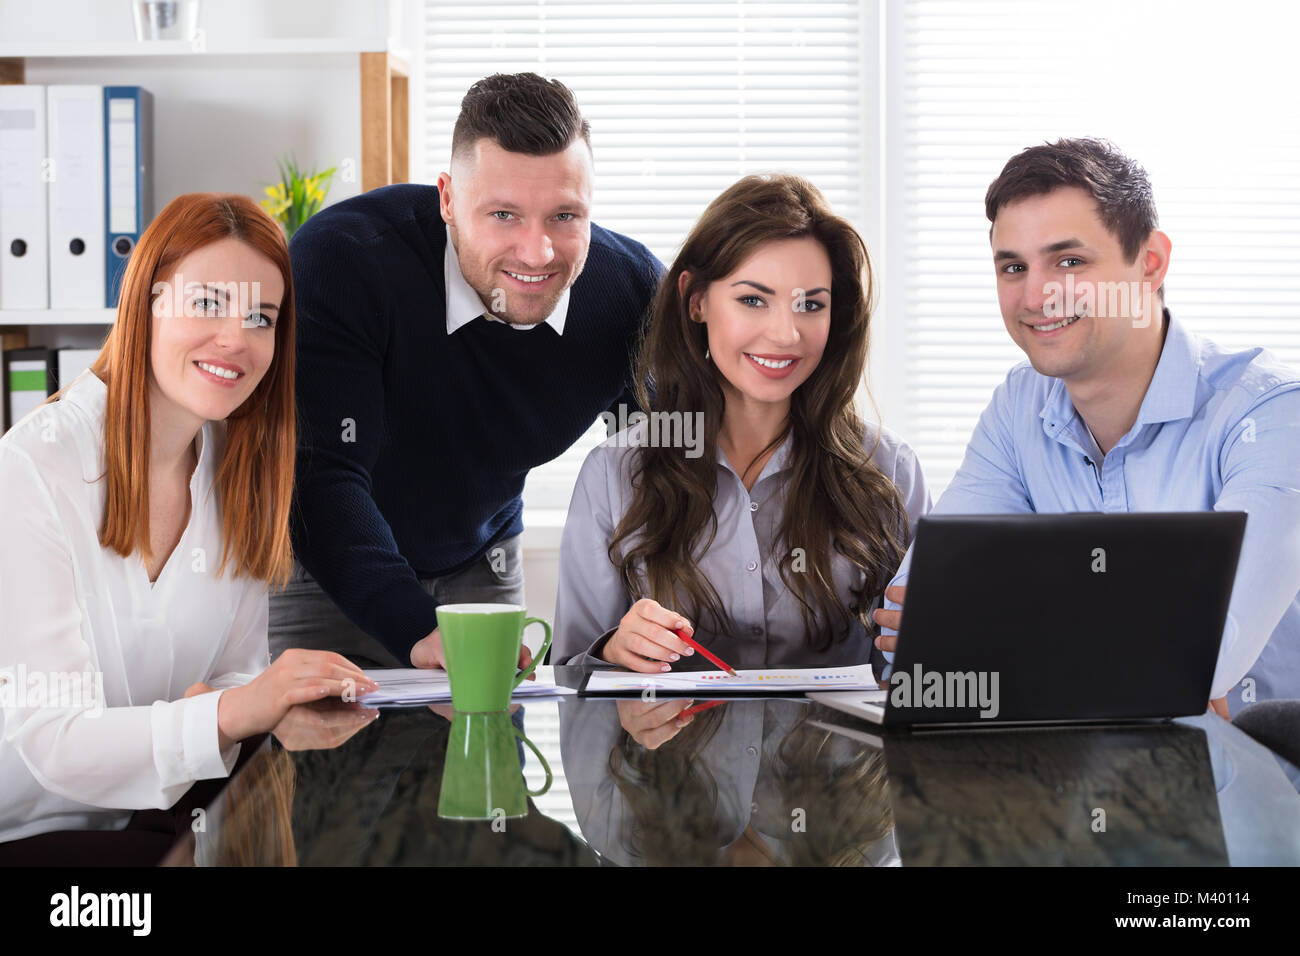 Group Of Business People Working In Meeting At Workplace In Office Stock Photo